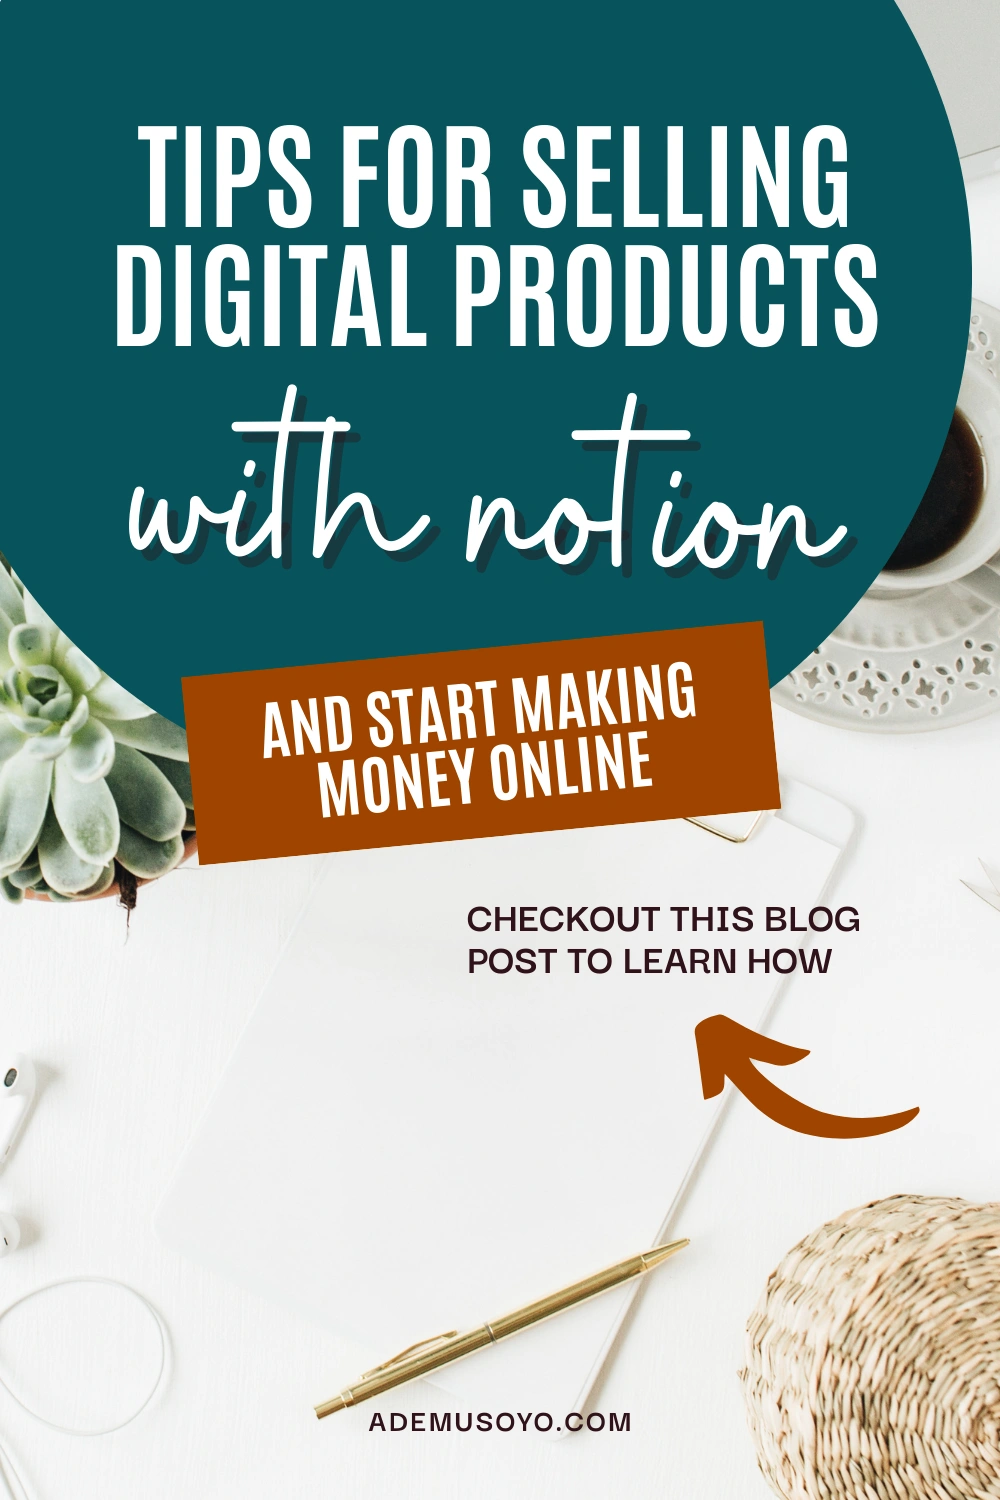 Notion is an online tool for creating beautiful digital products like digital planners, content calendars, and more. Read on to learn how to sell notion template digital products and make money online.